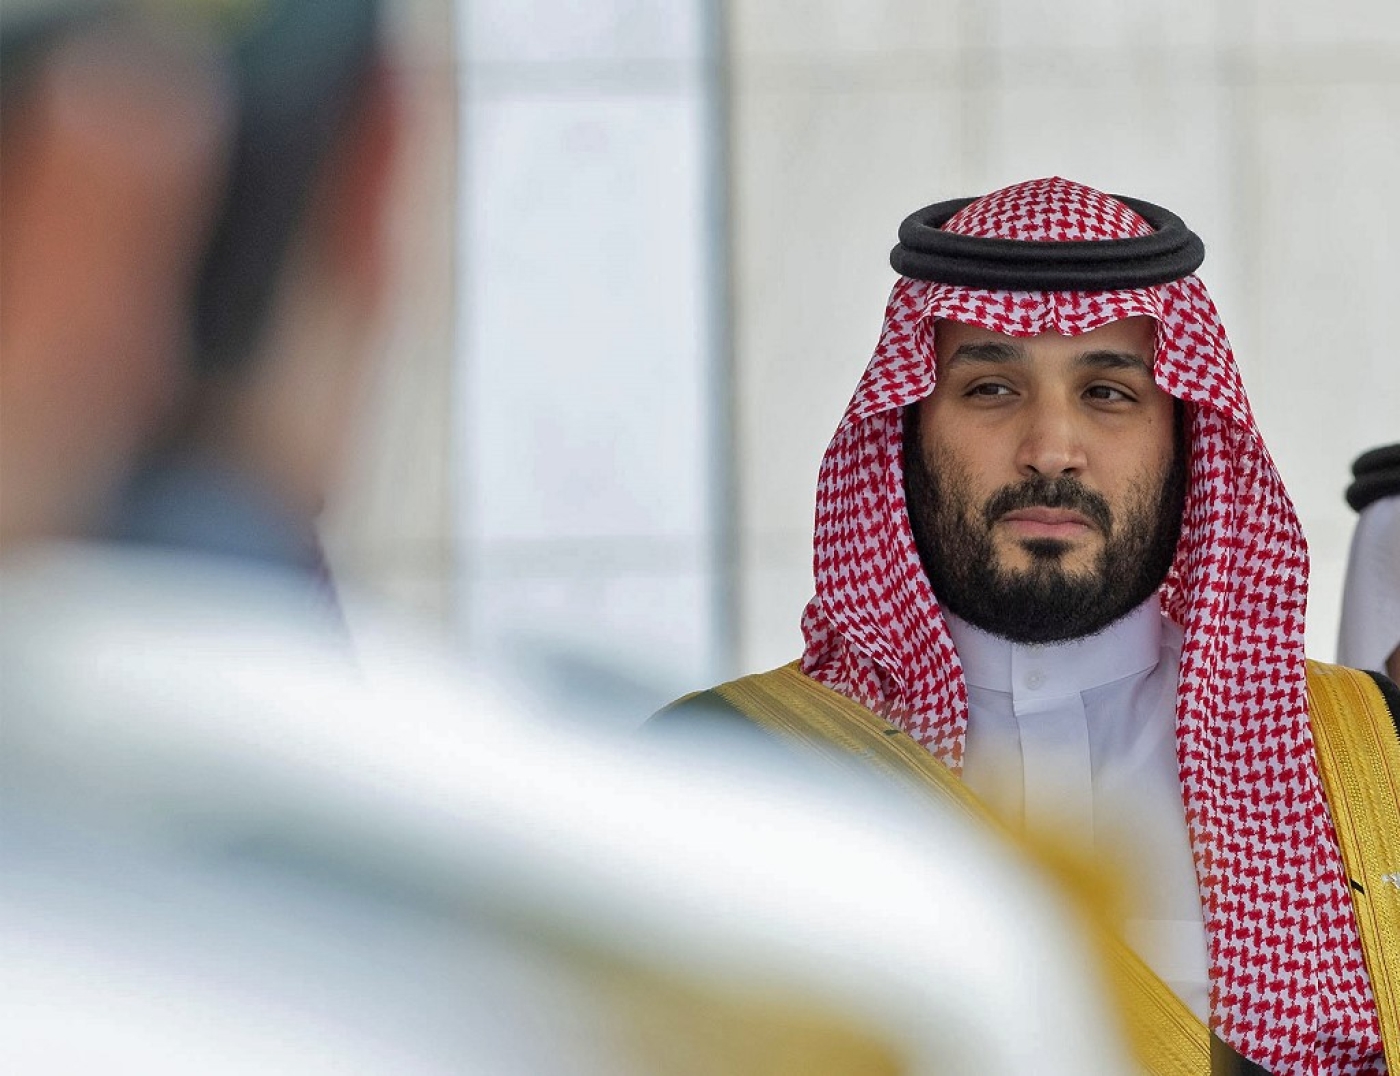 Shortly after coming to power, Mohammed bin Salman launched a purge of high-profile officials and businessmen in the kingdom